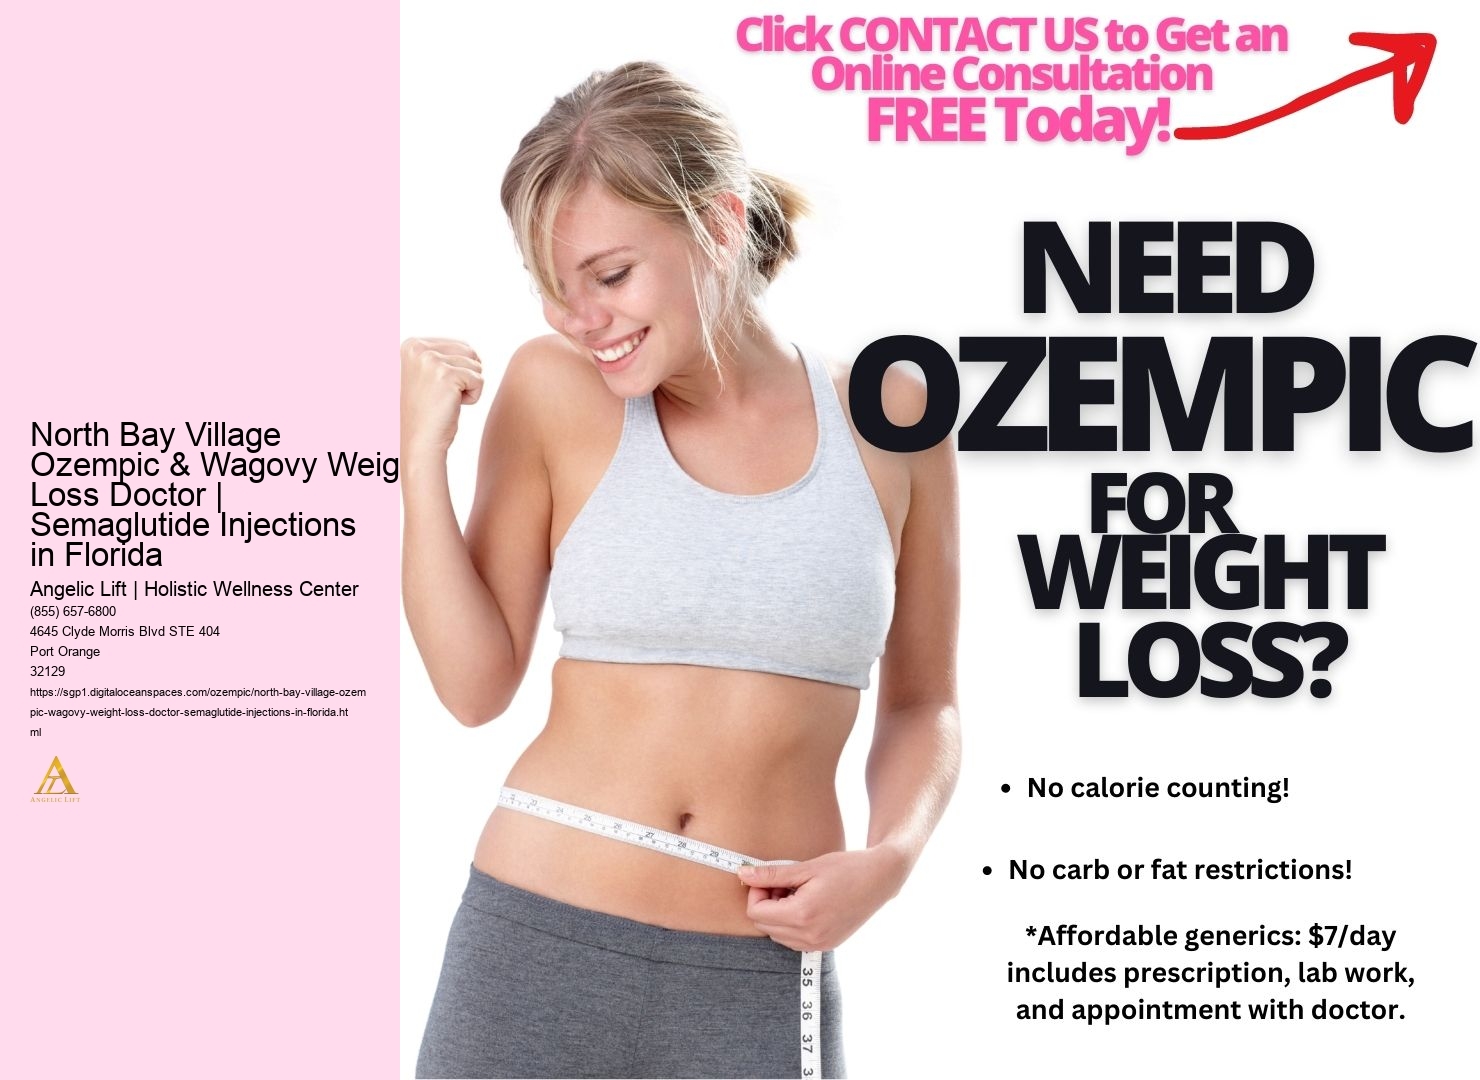 North Bay Village Ozempic & Wagovy Weight Loss Doctor | Semaglutide Injections in Florida